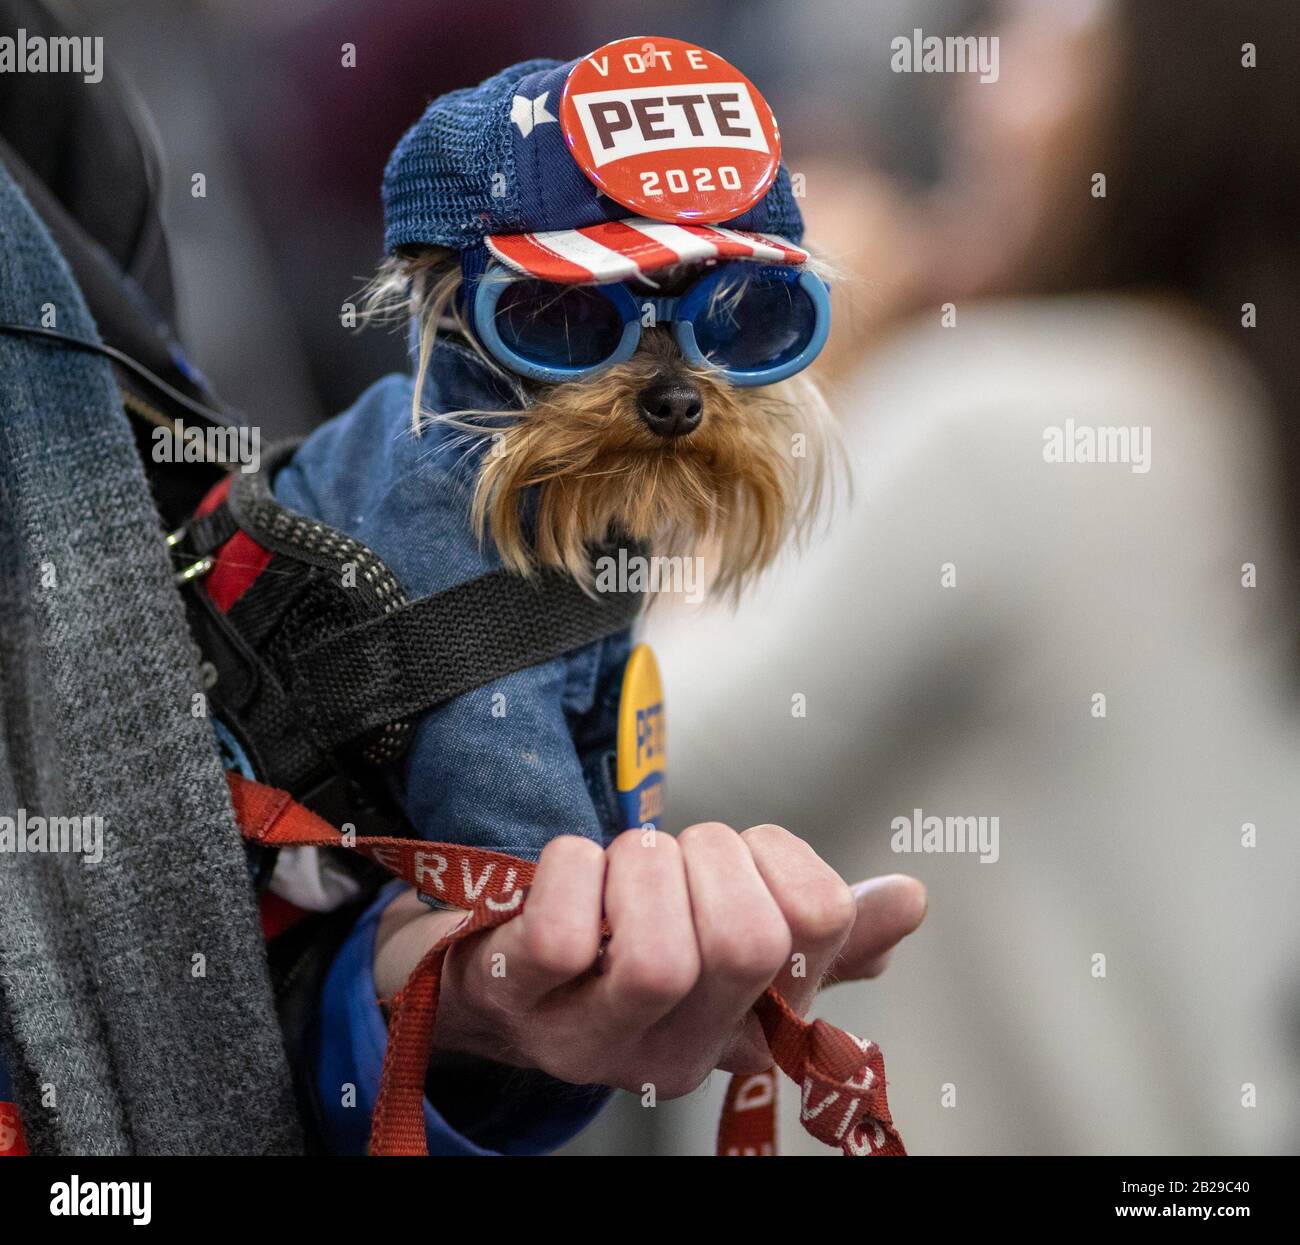 Raleigh, North Carolina, USA. 29th Feb 2020. Teenie Tim, a Yorkshire Terrier weighing less than two pounds, is held by guardian Josh Paul, during a campaign rally in Raleigh, N.C., Saturday, Feb. 29, 2020. Buttigieg, who finished in fourth place this evening in neighboring South Carolina, is campaigning in North Carolina and other states in advance of the big Super Tuesday matchups on March 3, which might serve to narrow the democratic field immensely. Credit: Sipa USA/Alamy Live News Stock Photo